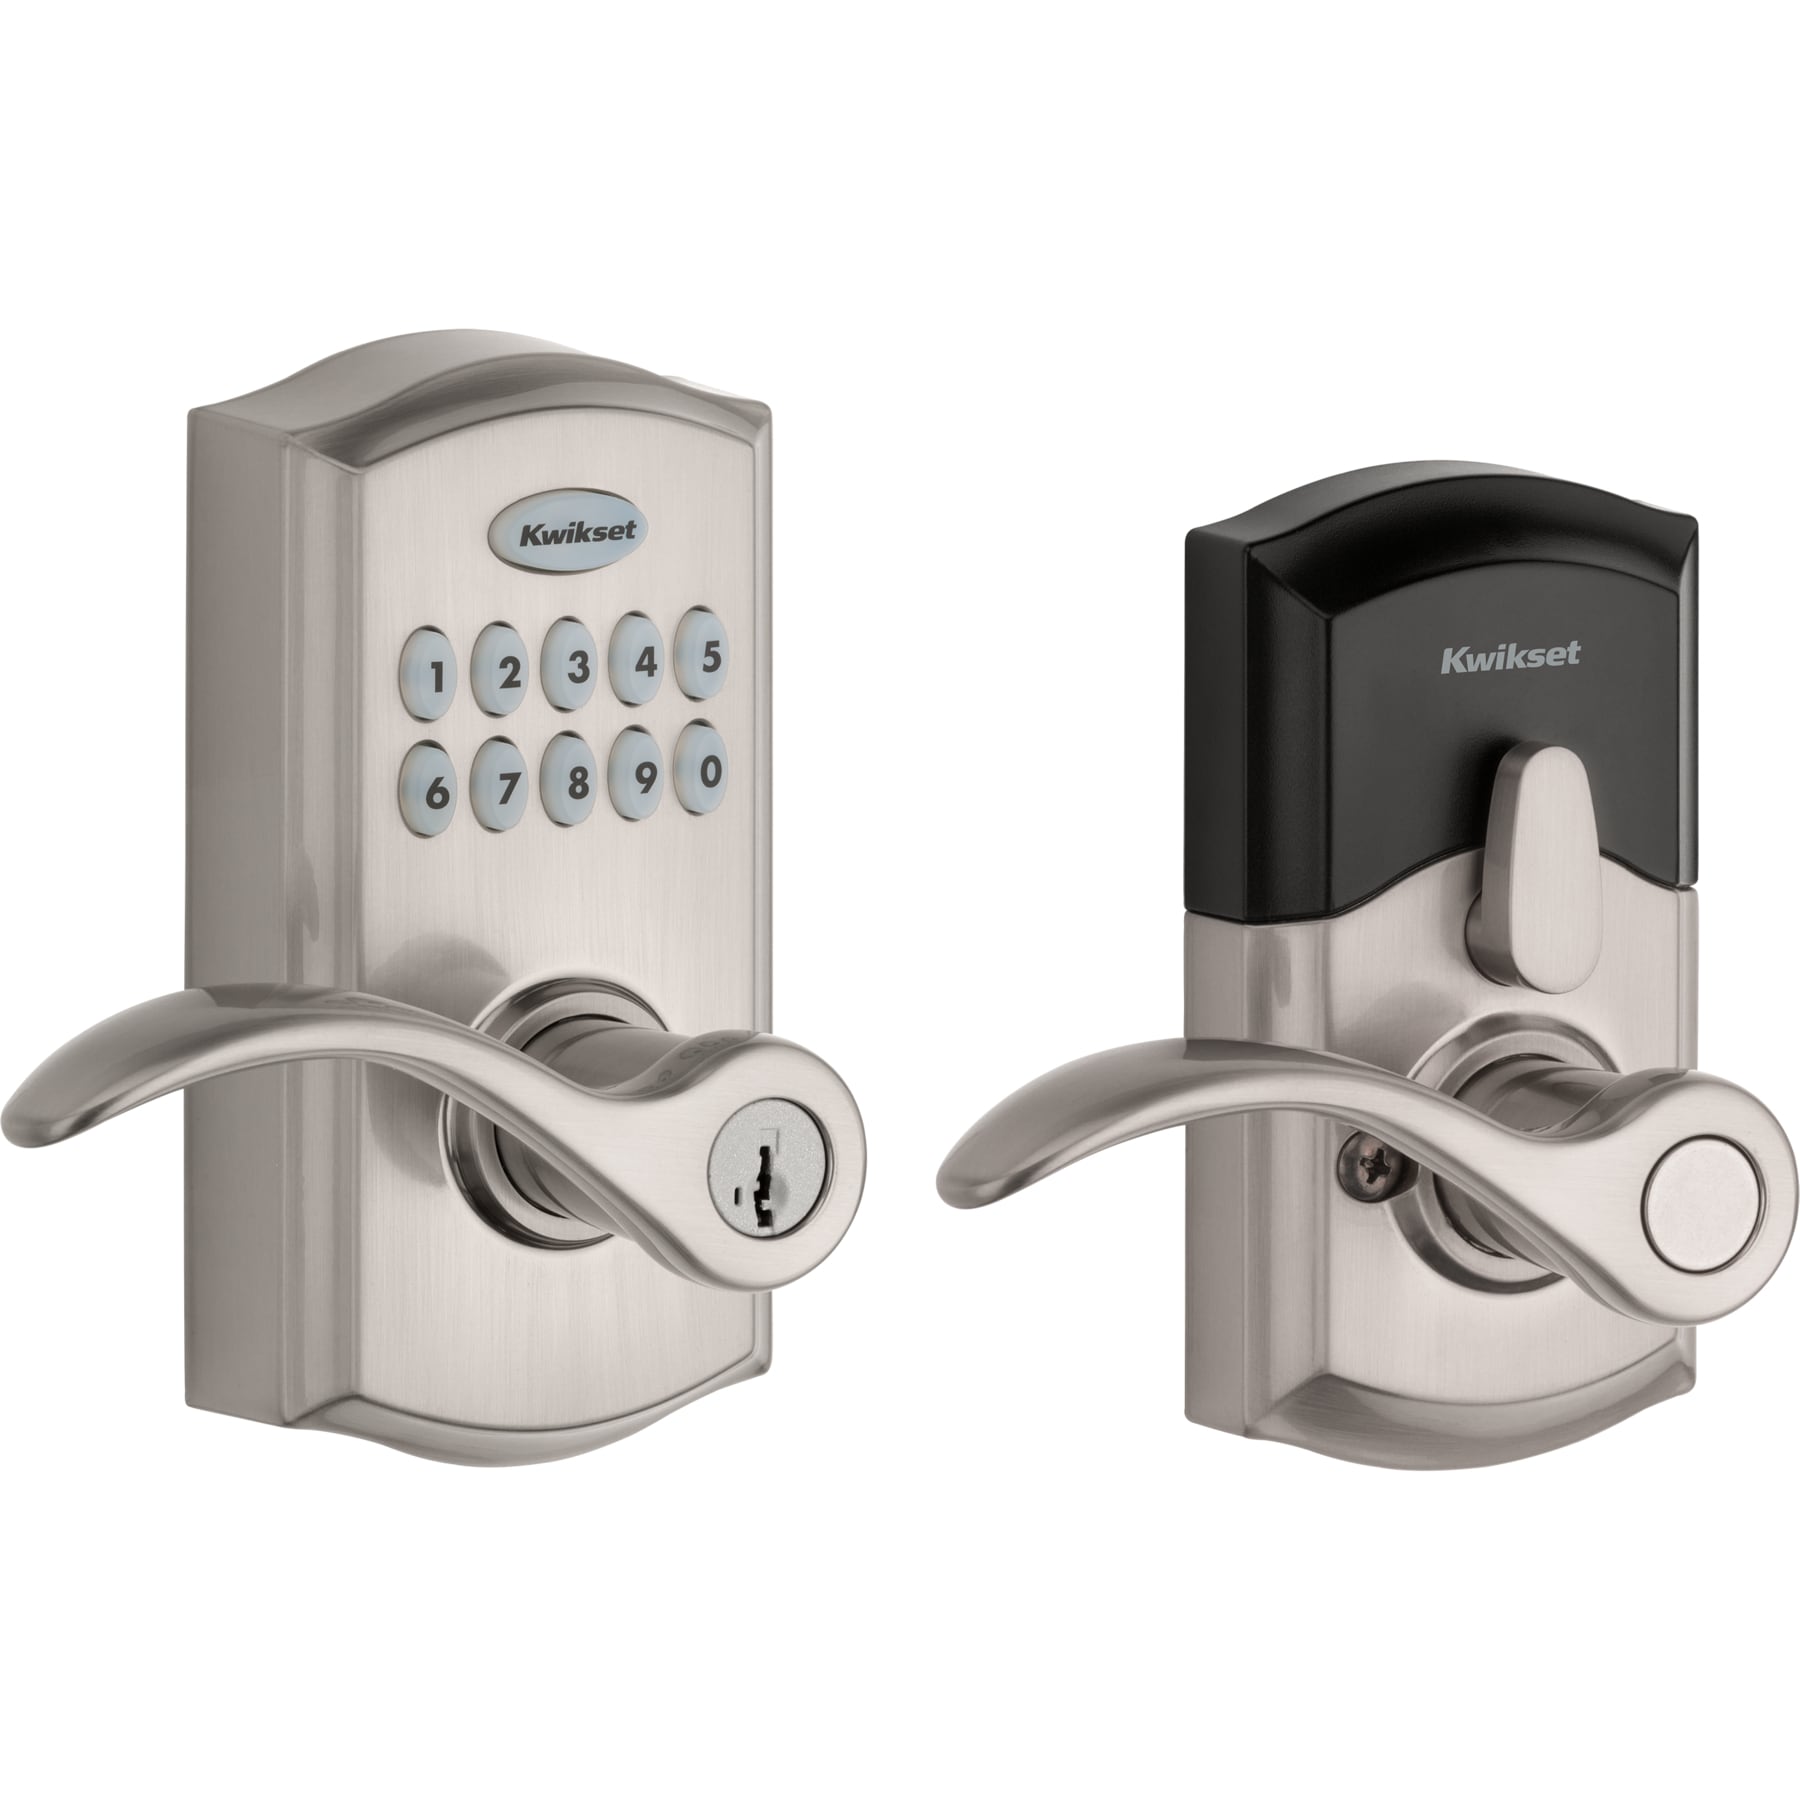 Kwikset Signature Single at 955 Locks the Cylinder Handle department Electronic Satin Series Nickel Electronic in SmartCode Keypad Lighted Smartkey Door